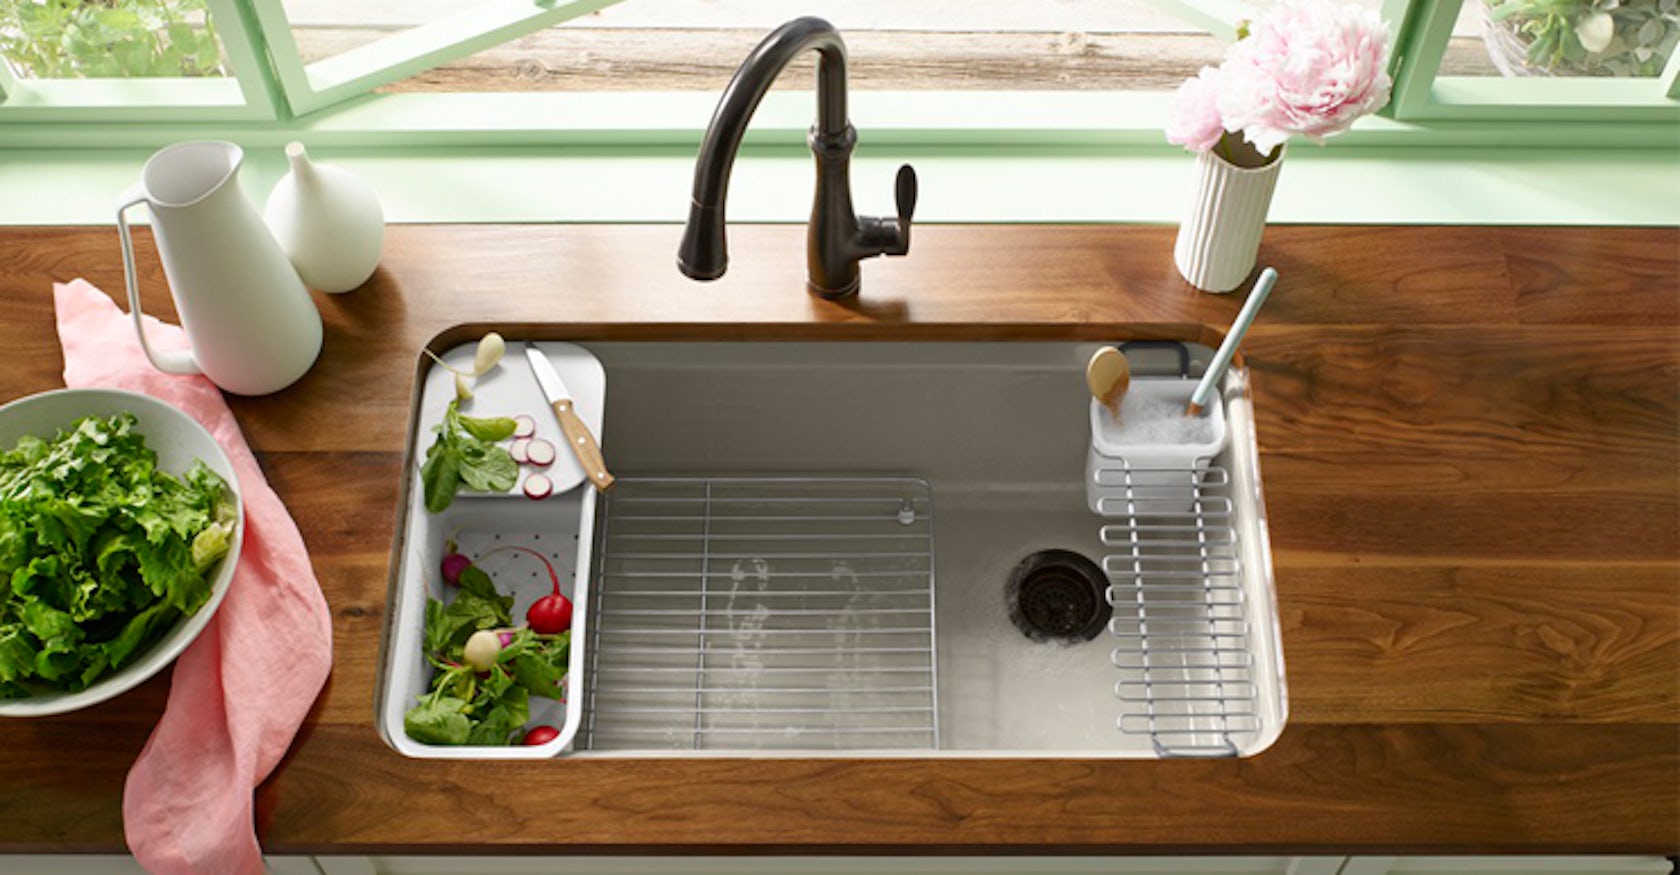 How to Select an Ergonomic Kitchen Sink for Your Individual Needs